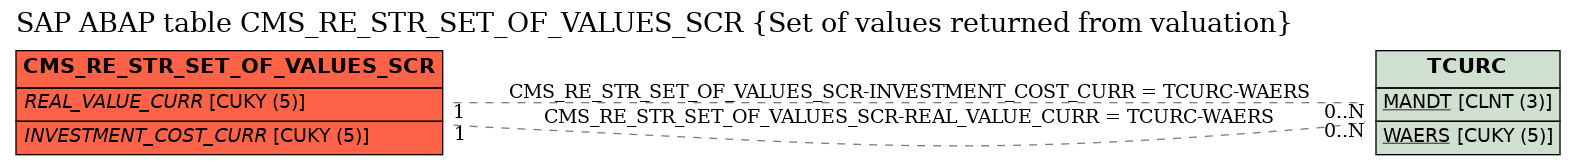 E-R Diagram for table CMS_RE_STR_SET_OF_VALUES_SCR (Set of values returned from valuation)